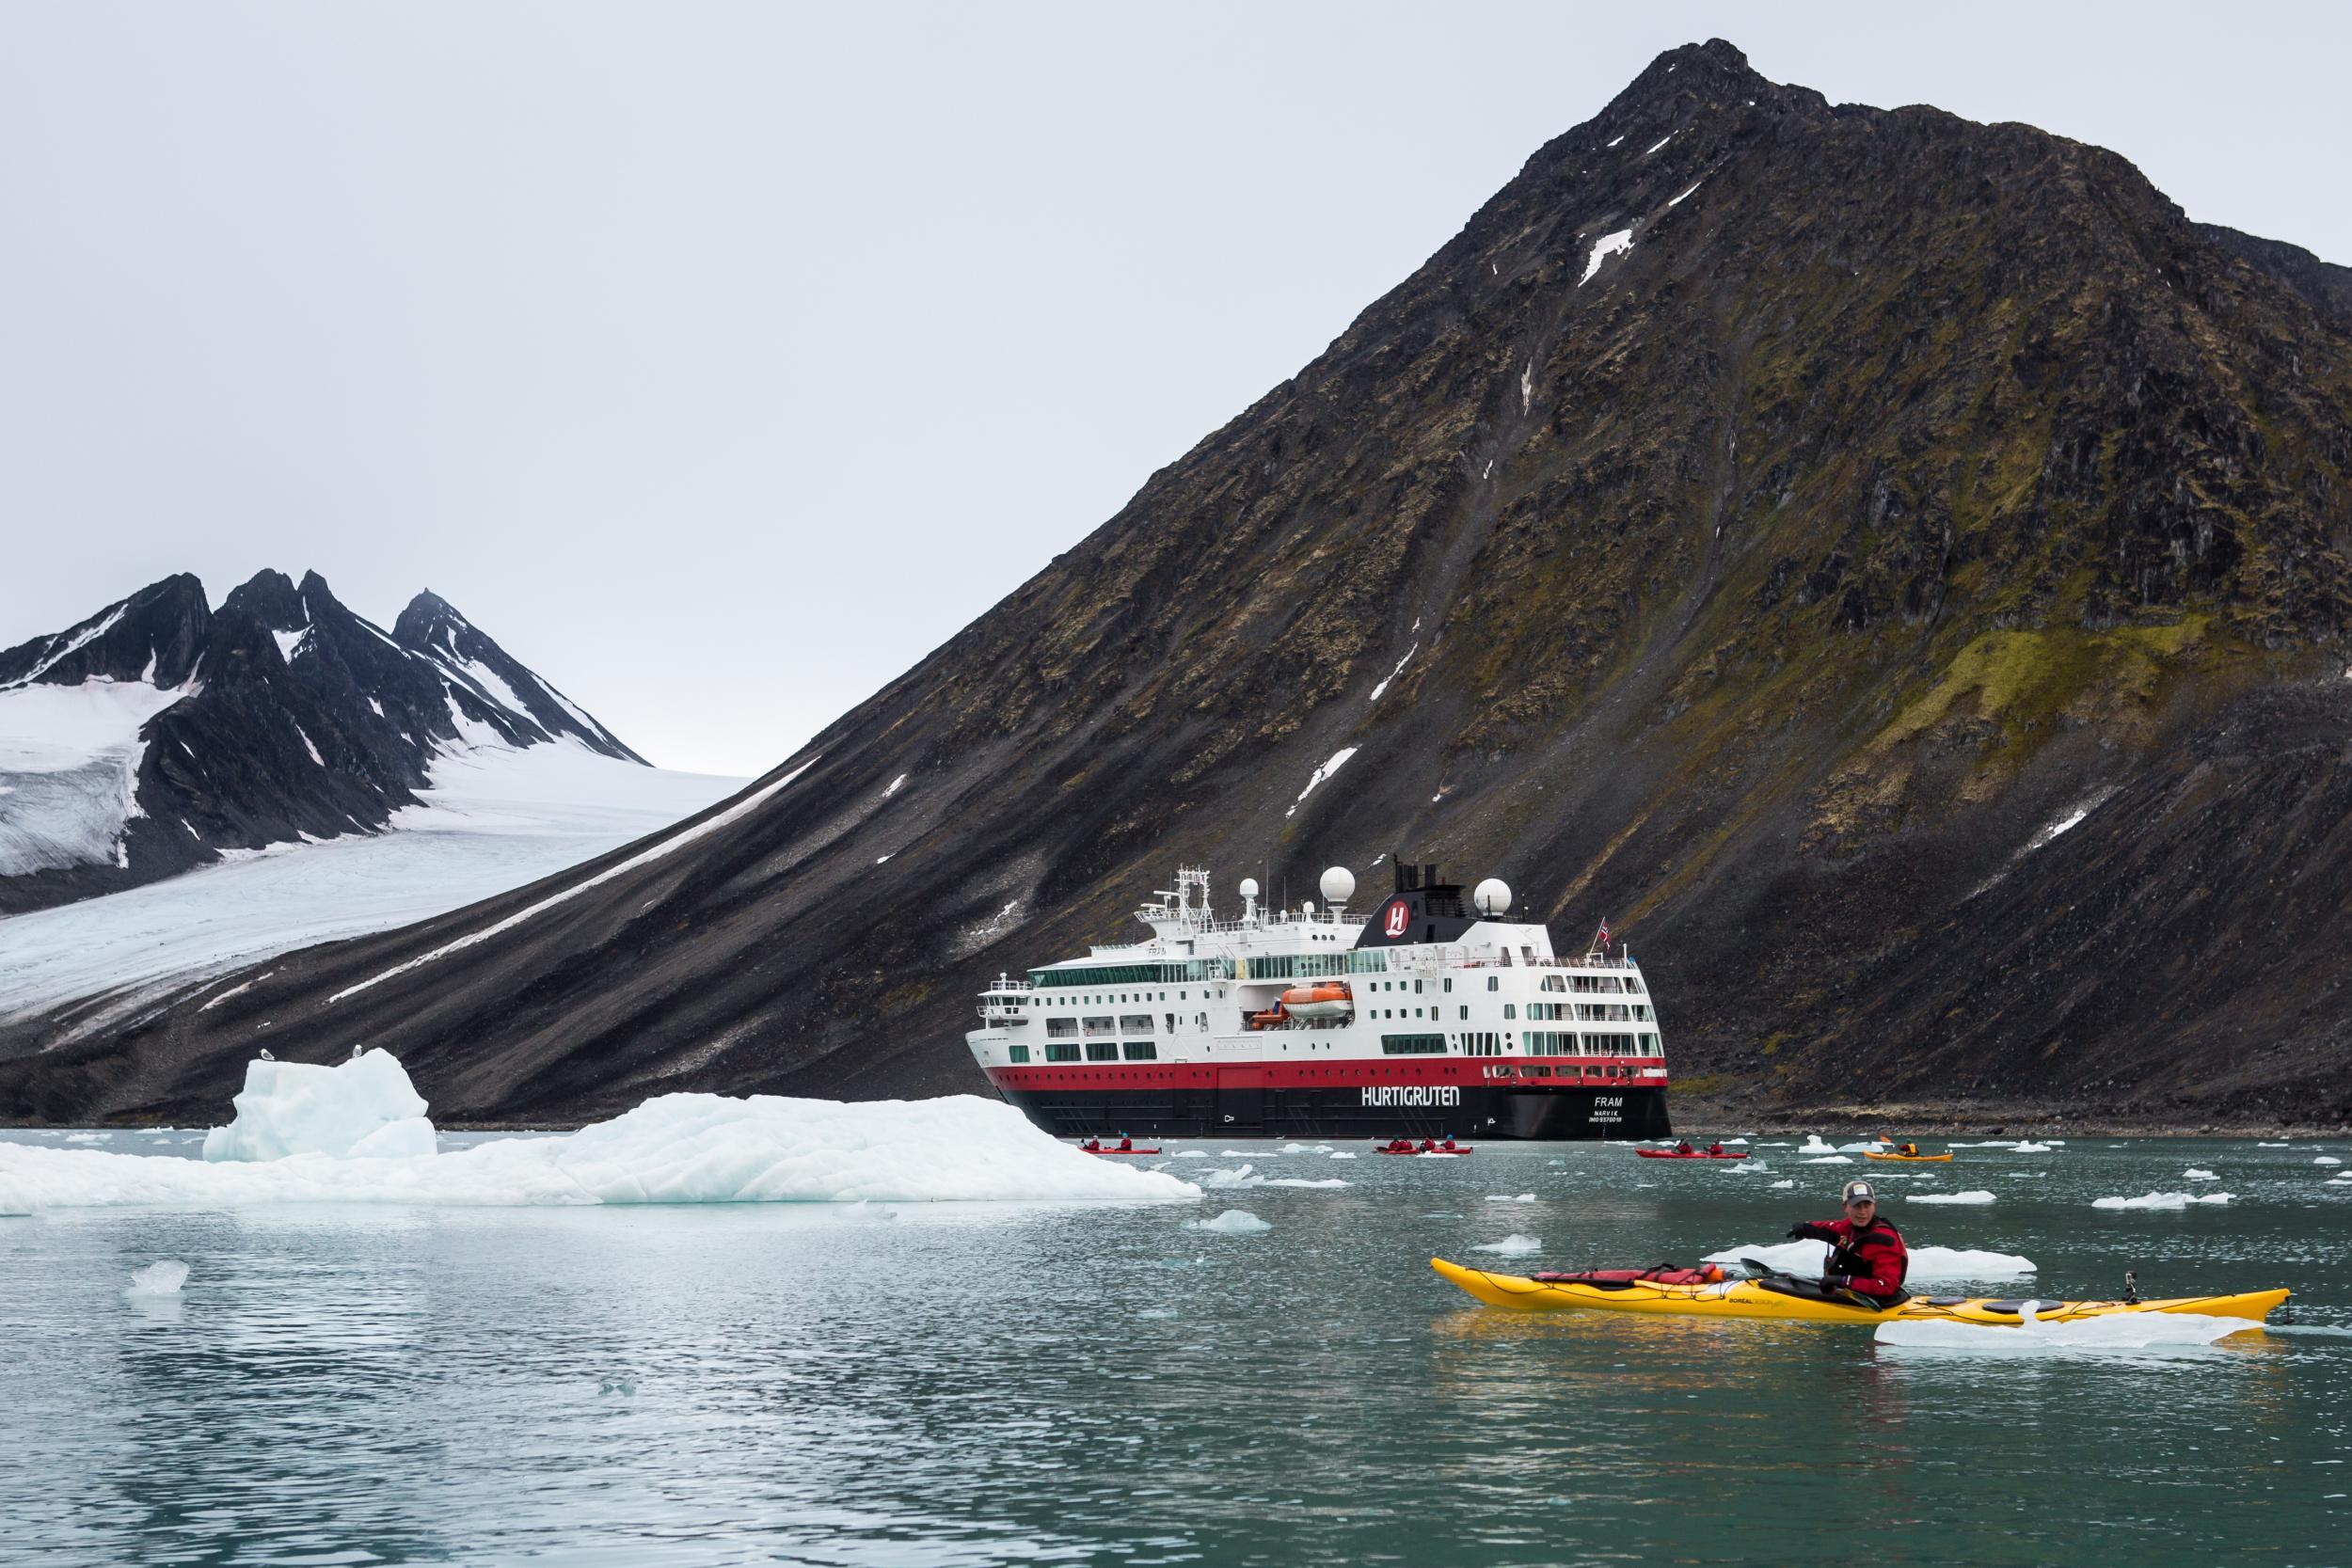 Cruise excursions can include exploring fjords and getting up close to icebergs by kayak